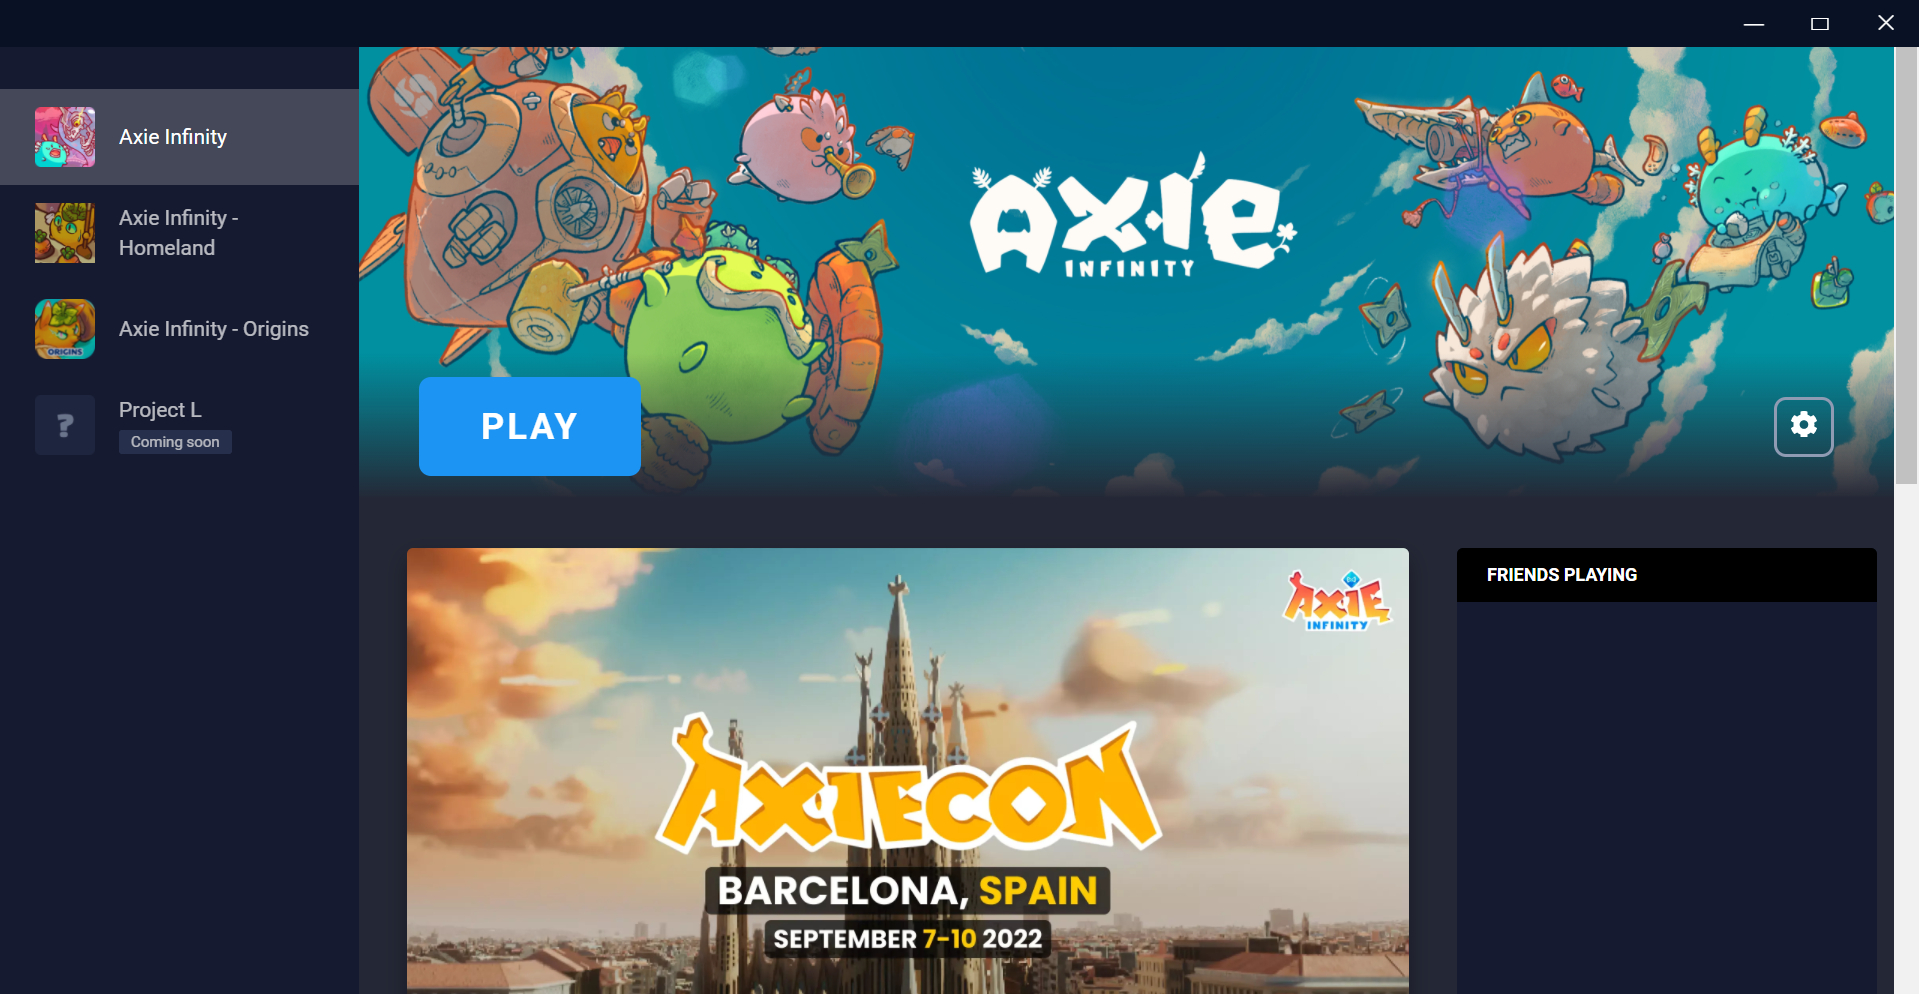 Axie Infinity Beginner's Guide Part II: Stats and Parts – Real Life Questing